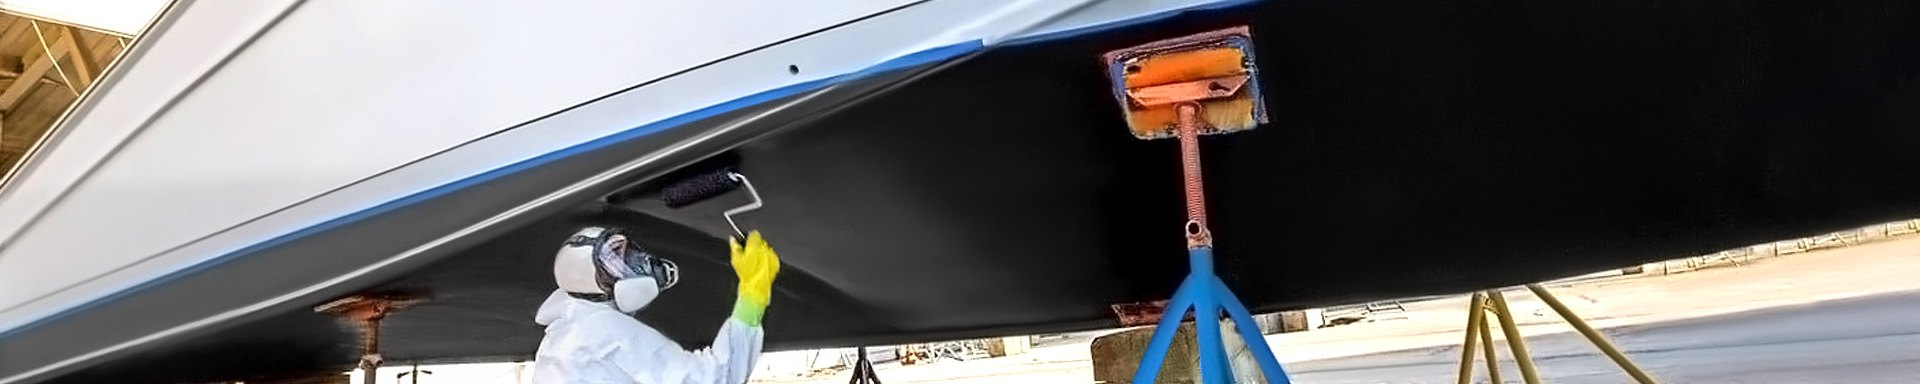 What You Need to Know About Antifouling Paint for Boat Bottoms